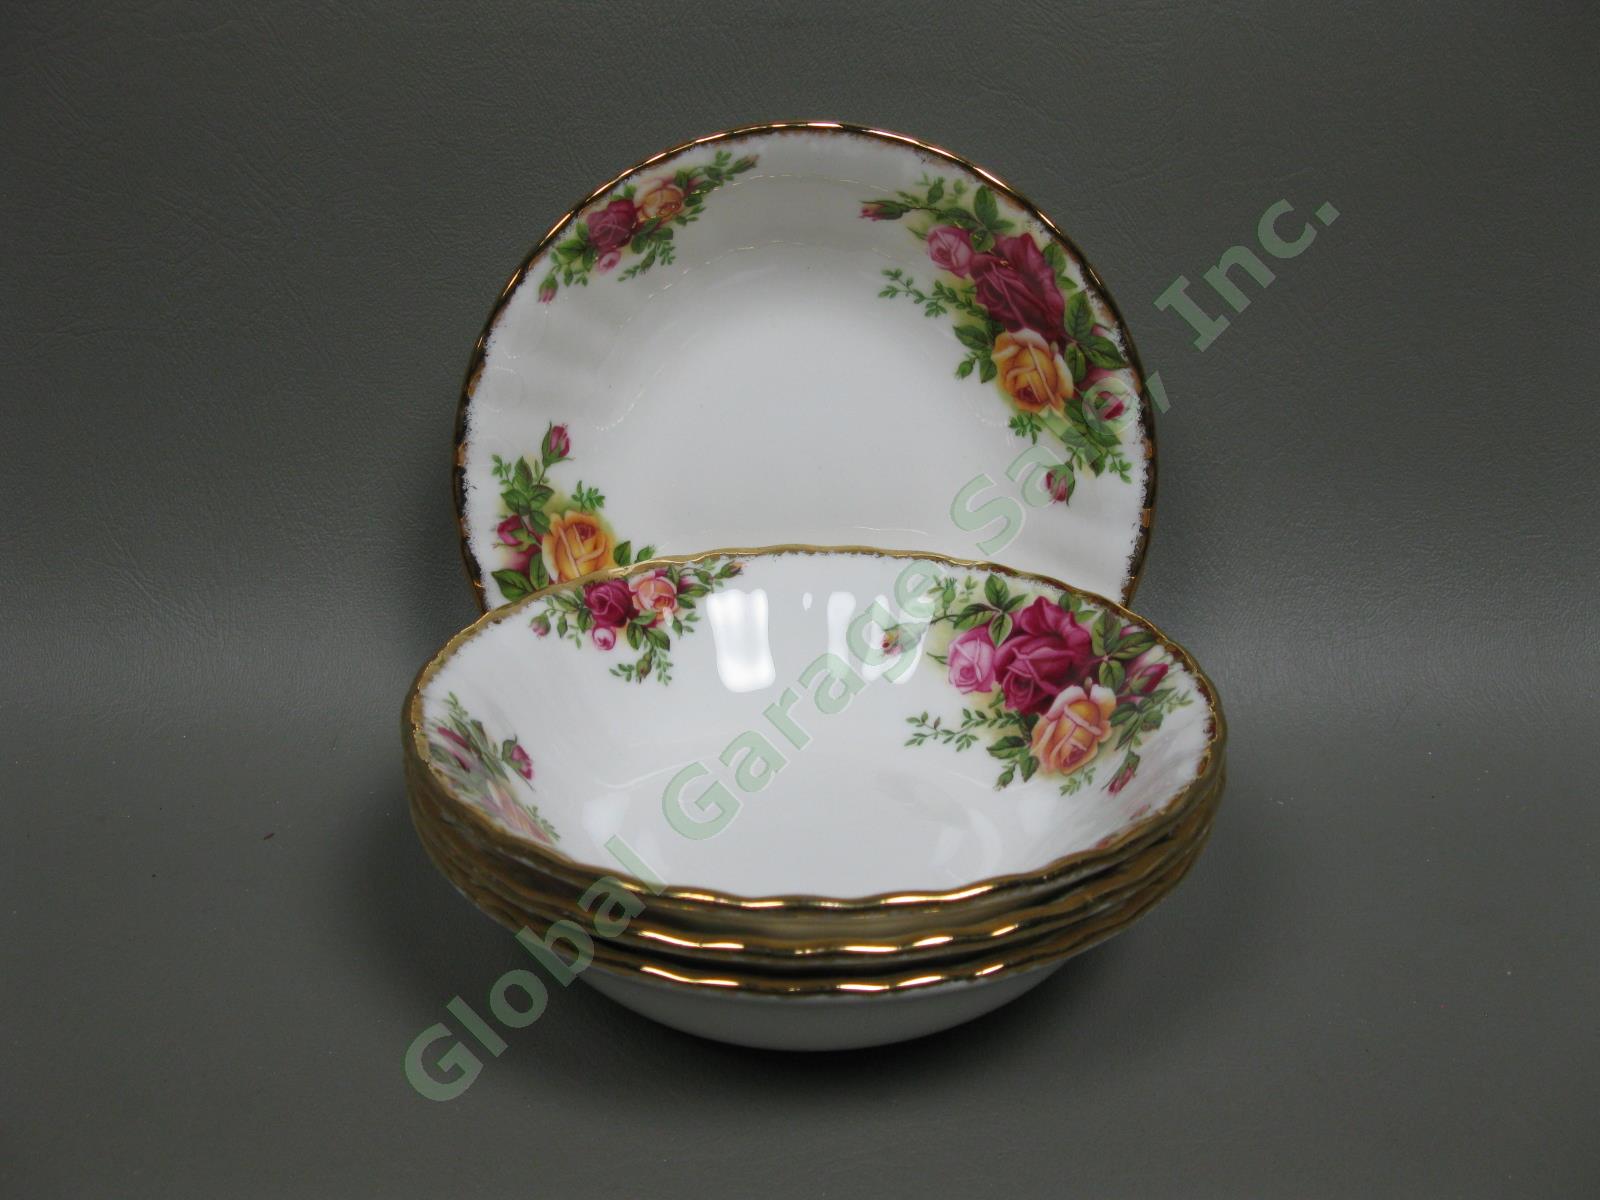 4 Royal Albert Old Country Roses Place Settings Serving Bowl Platter Plate Set 7